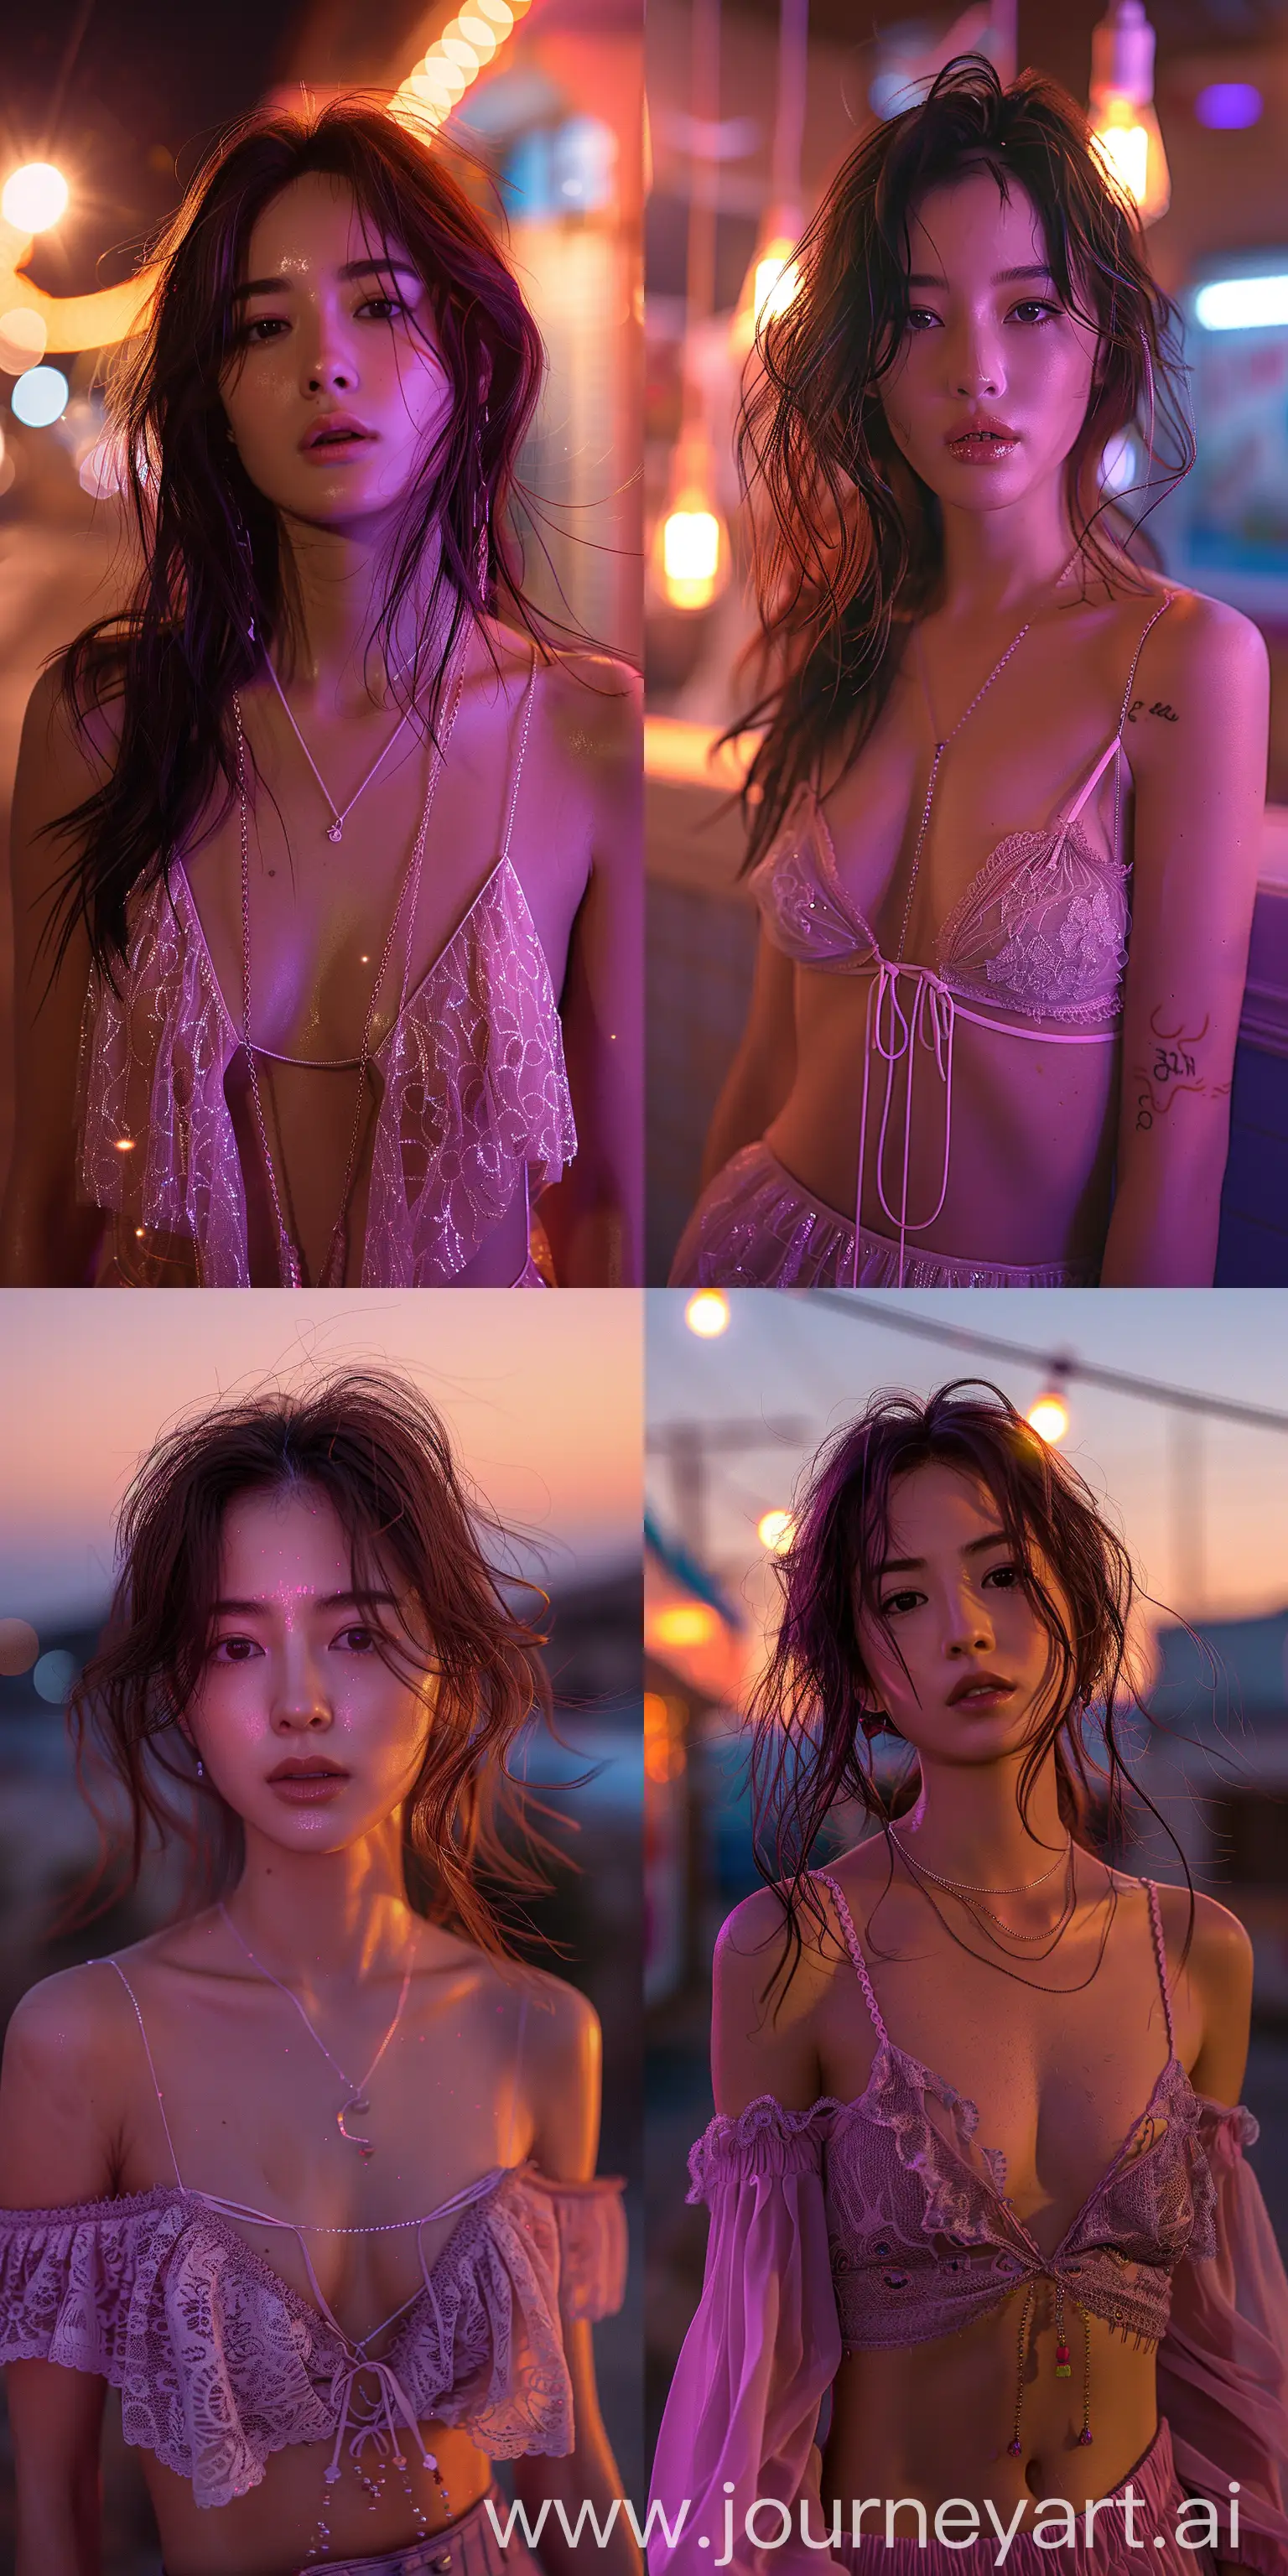 Elegant-Asian-Girl-in-NeonInfused-Night-Ambiance